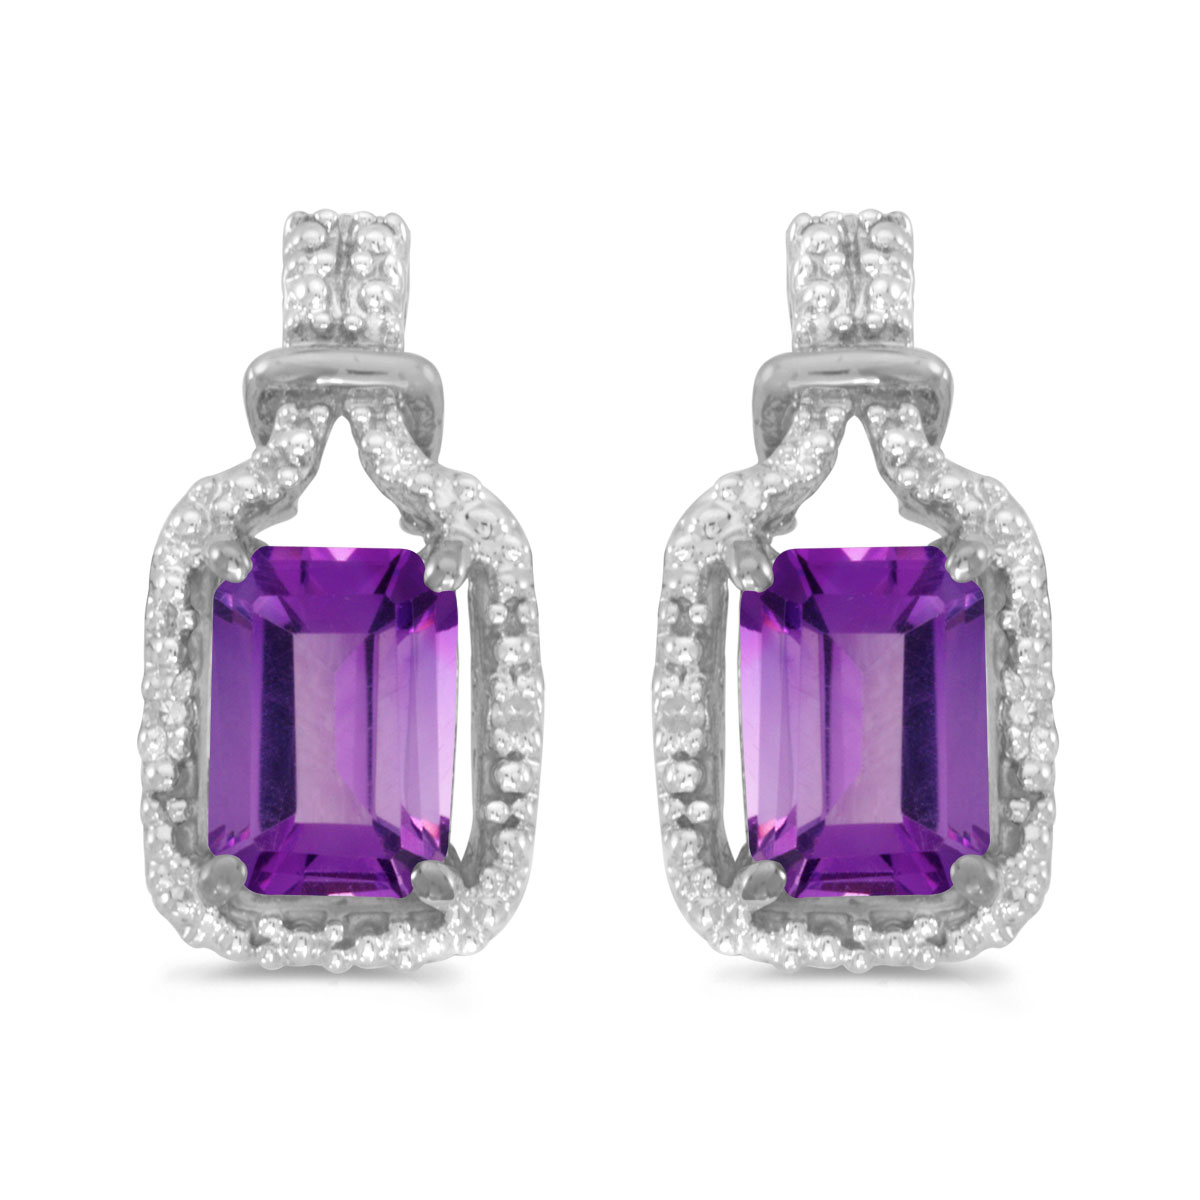 These 14k white gold emerald-cut amethyst and diamond earrings feature 7x5 mm genuine natural ame...